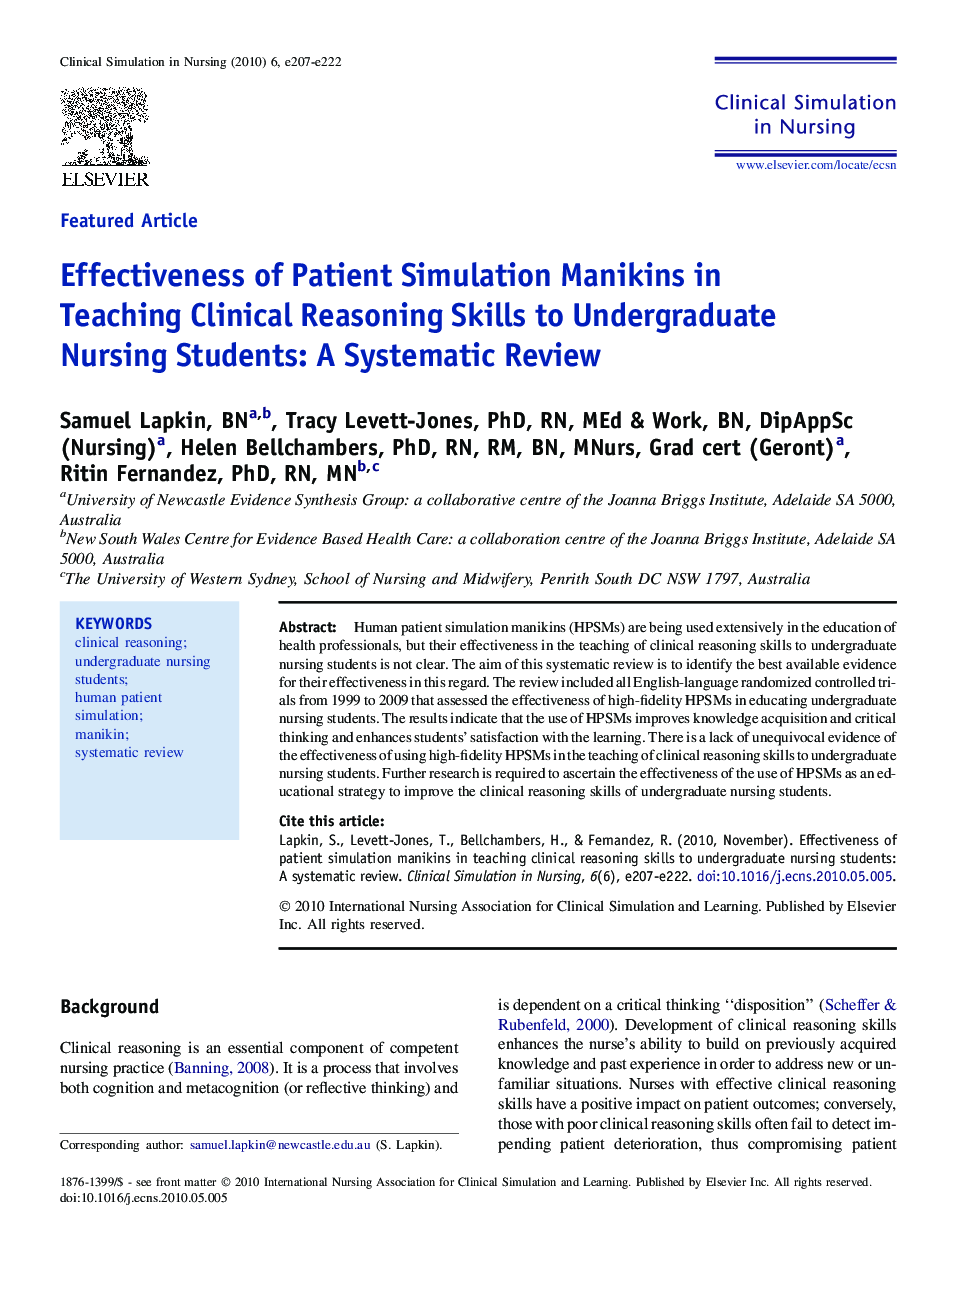 Effectiveness of Patient Simulation Manikins in Teaching Clinical Reasoning Skills to Undergraduate Nursing Students: A Systematic Review 